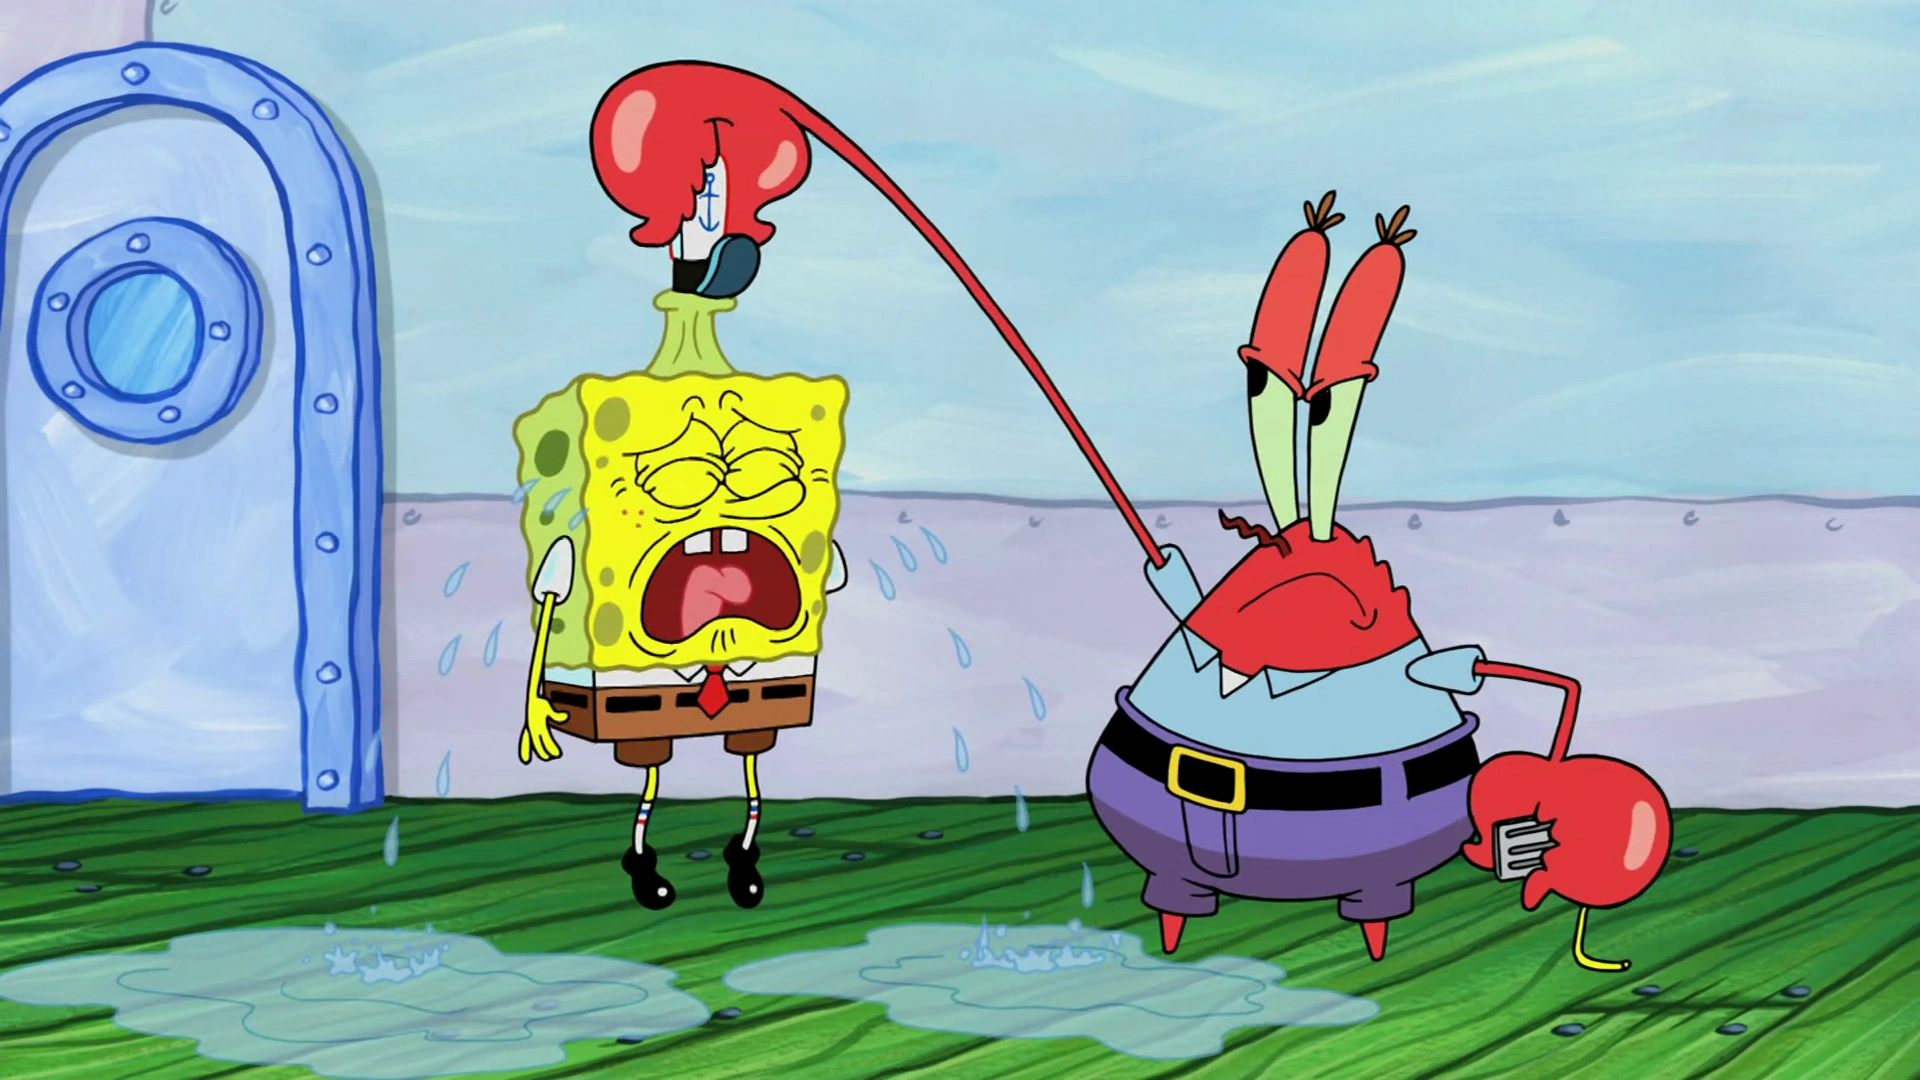 23 SpongeBob Reactions For Everyday Situations  Spongebob faces, Spongebob,  Funny spongebob faces